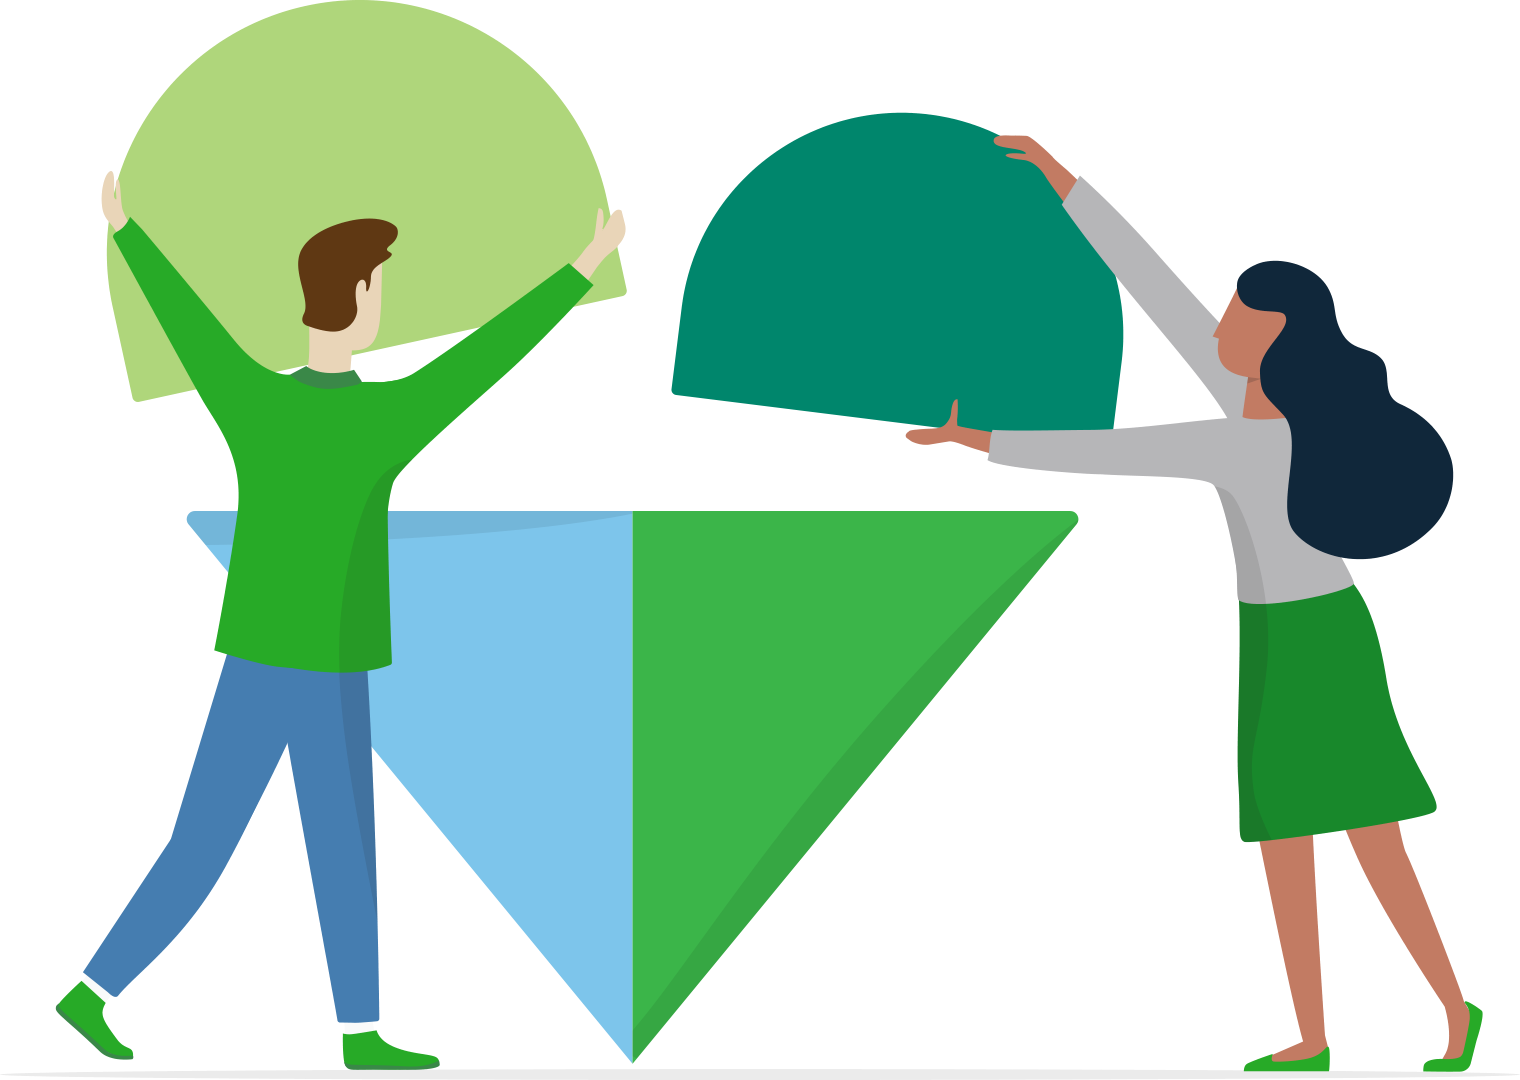 Illustration of people putting together a giant heart